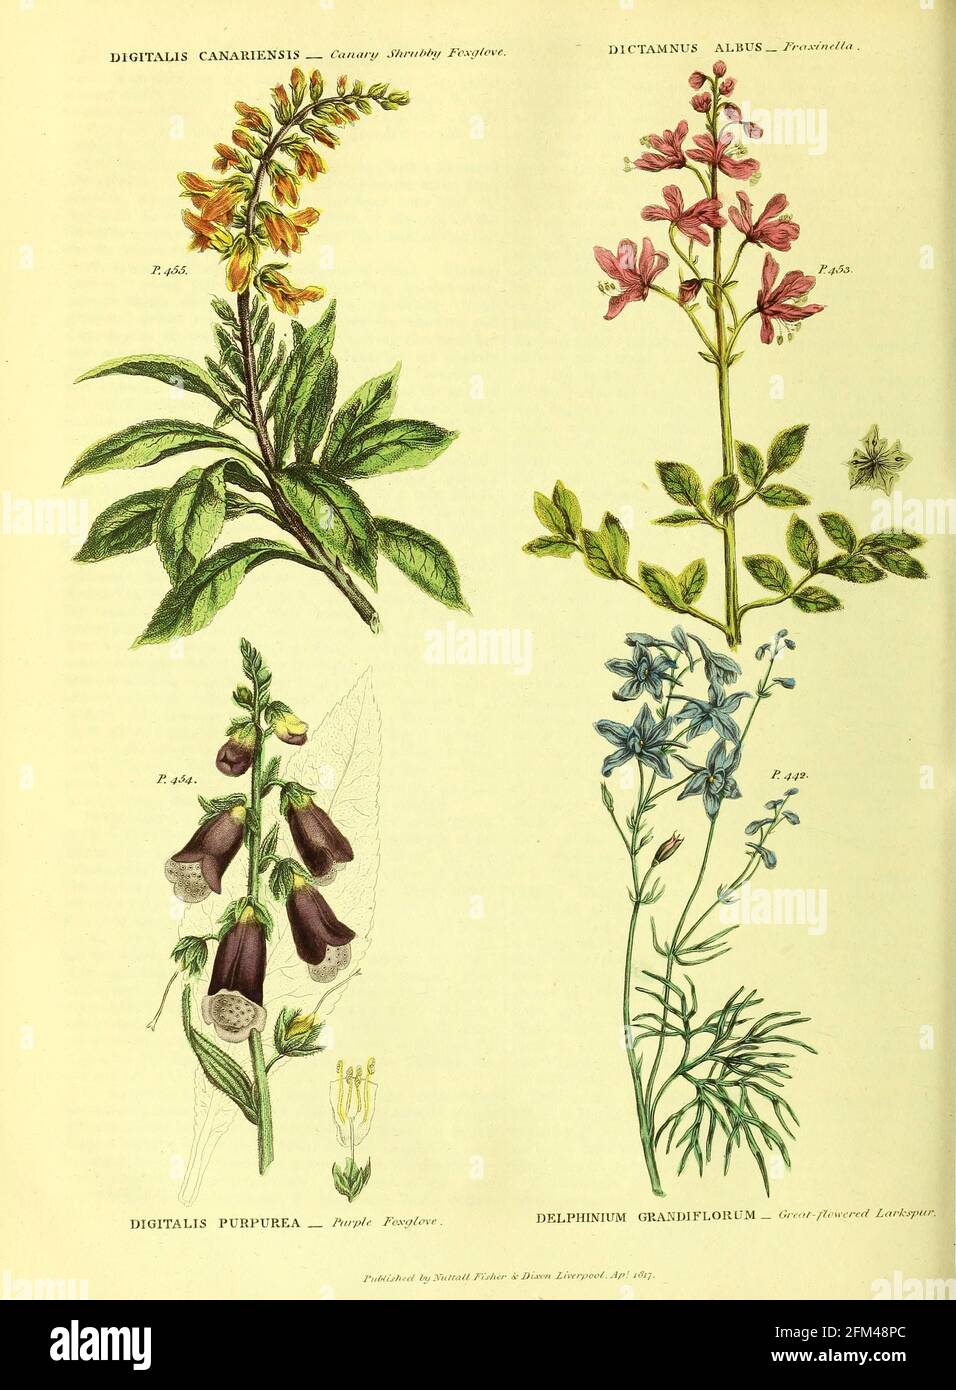 Digitalis canariensis [Canary shrubby foxglove], Dictamnus albus [fraxinella], Digitalis purpurea [Purple Foxglove], Delphinium grandiflorum [Great-flowered larkspur from Vol 1 of the book The universal herbal : or botanical, medical and agricultural dictionary : containing an account of all known plants in the world, arranged according to the Linnean system. Specifying the uses to which they are or may be applied By Thomas Green,  Published in 1816 by Nuttall, Fisher & Co. in Liverpool and Printed at the Caxton Press by H. Fisher Stock Photo